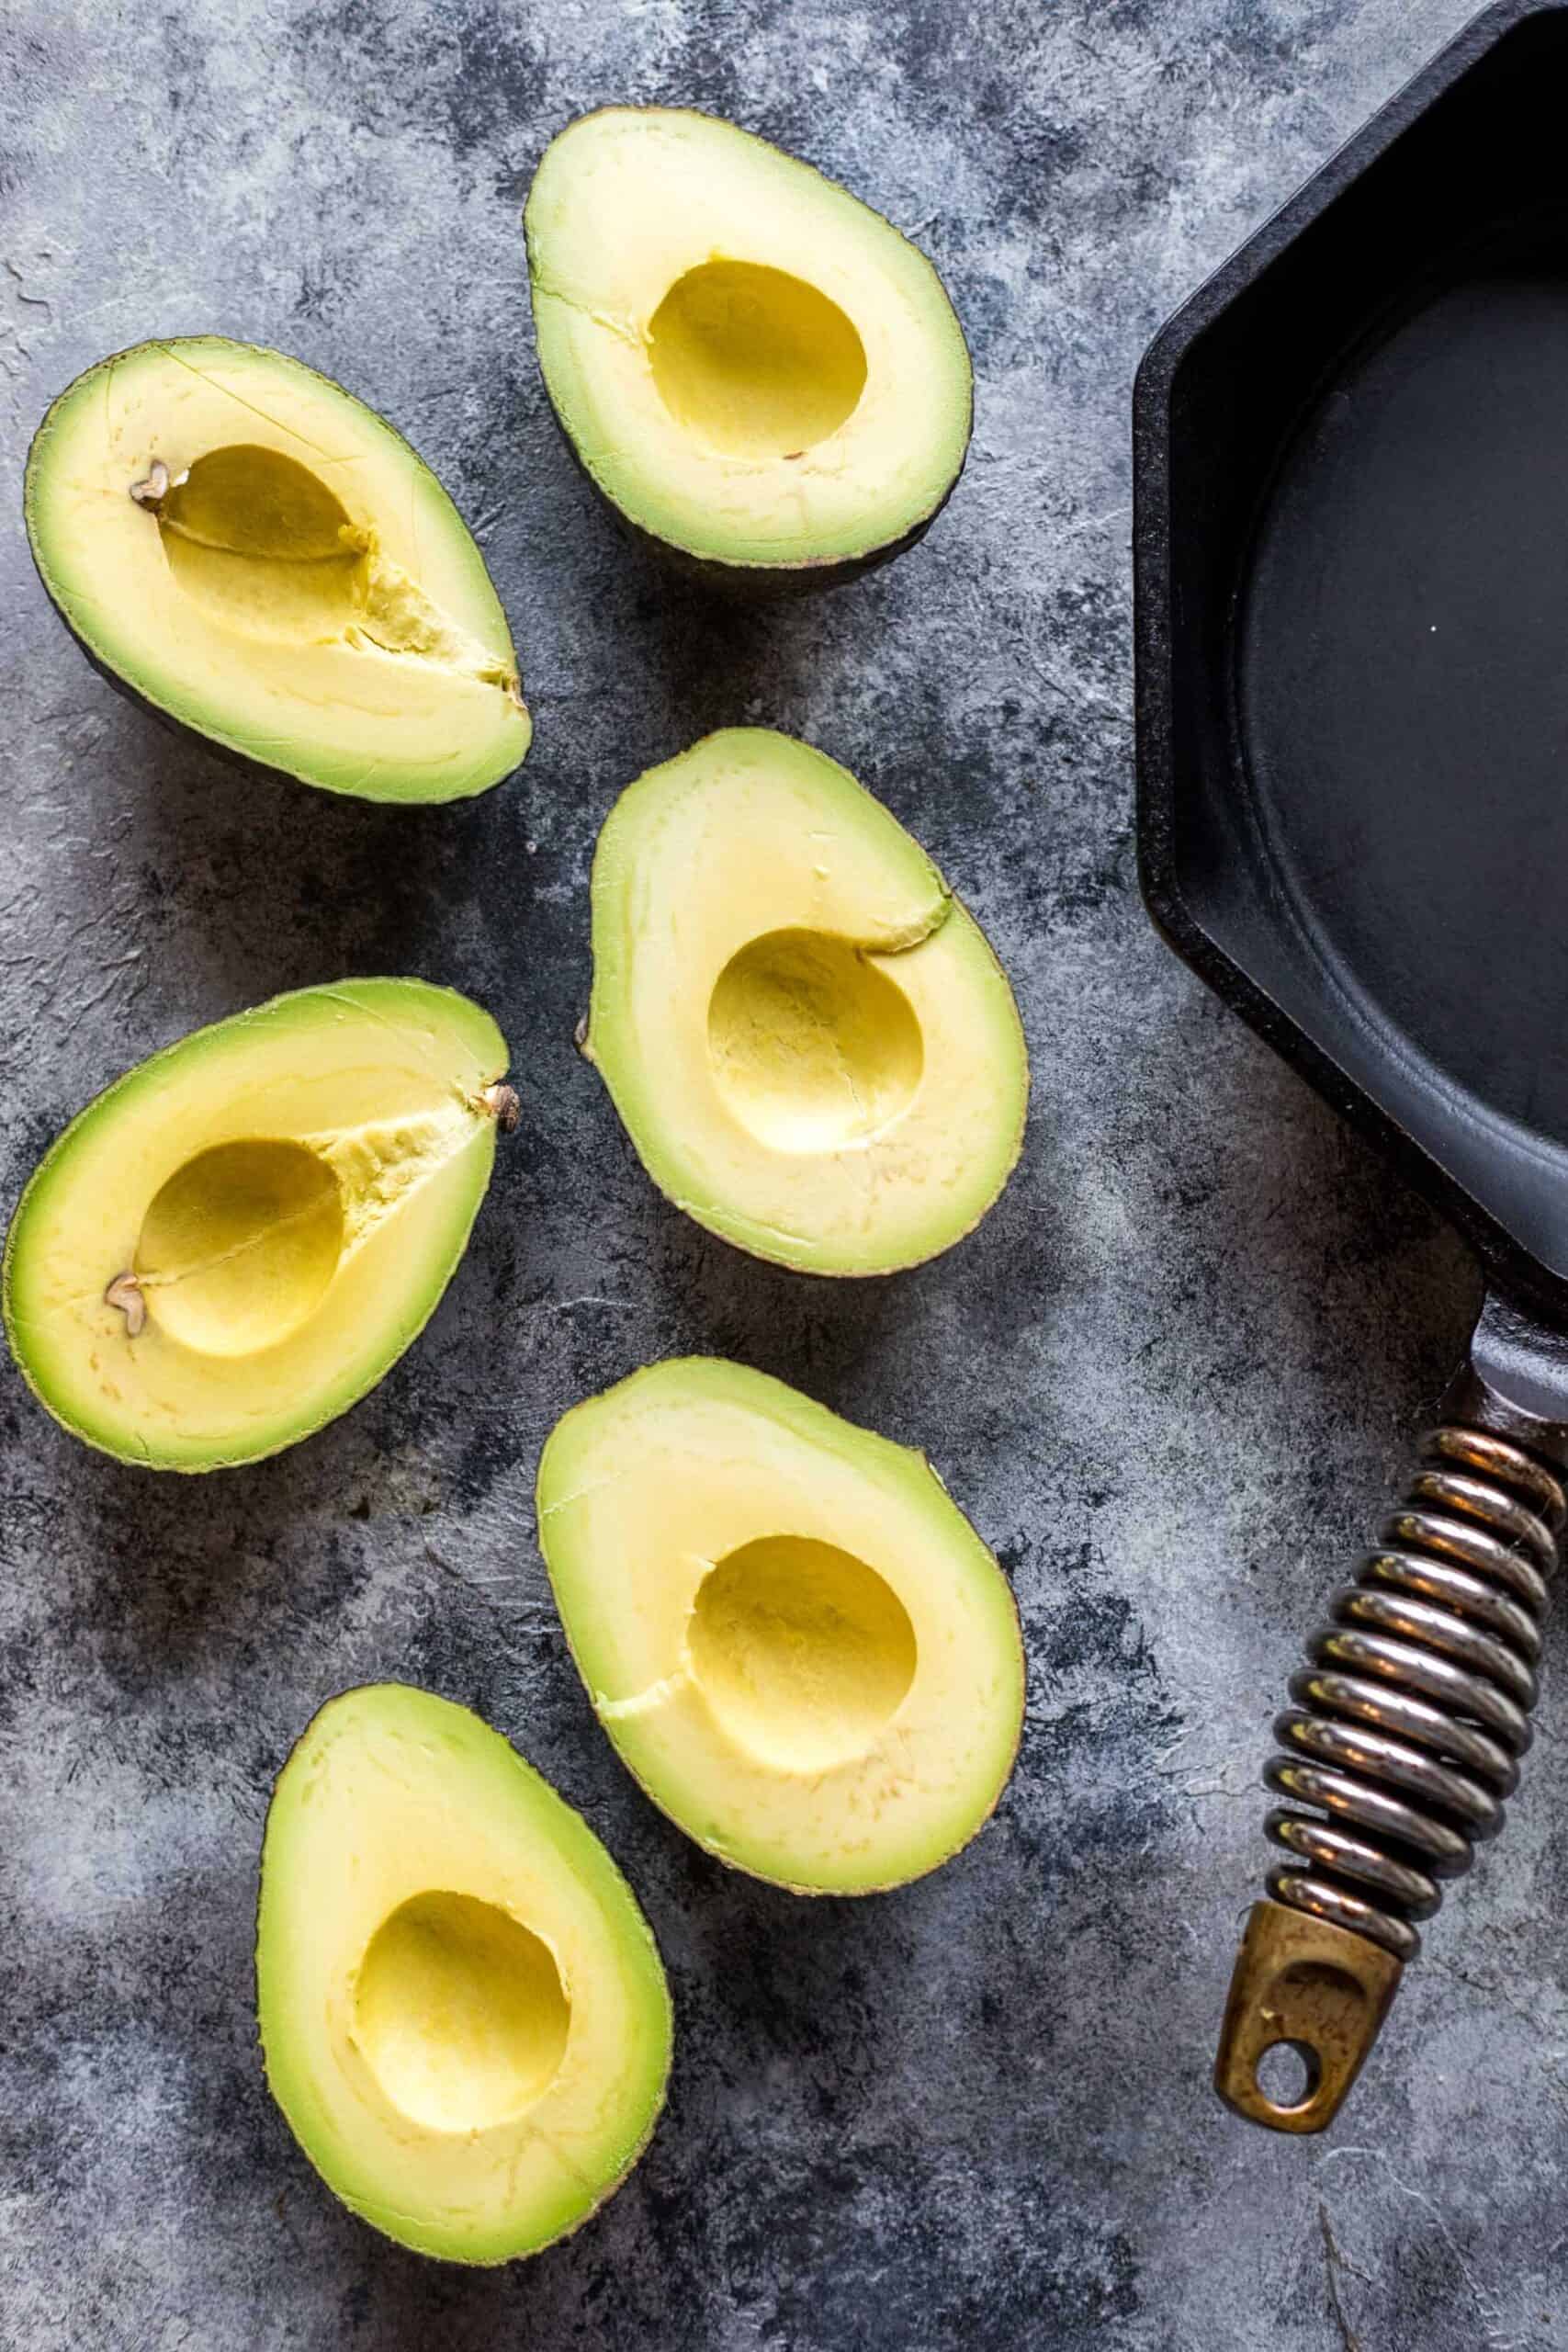 6 avocado halves and a cast iron skillet on a gray background